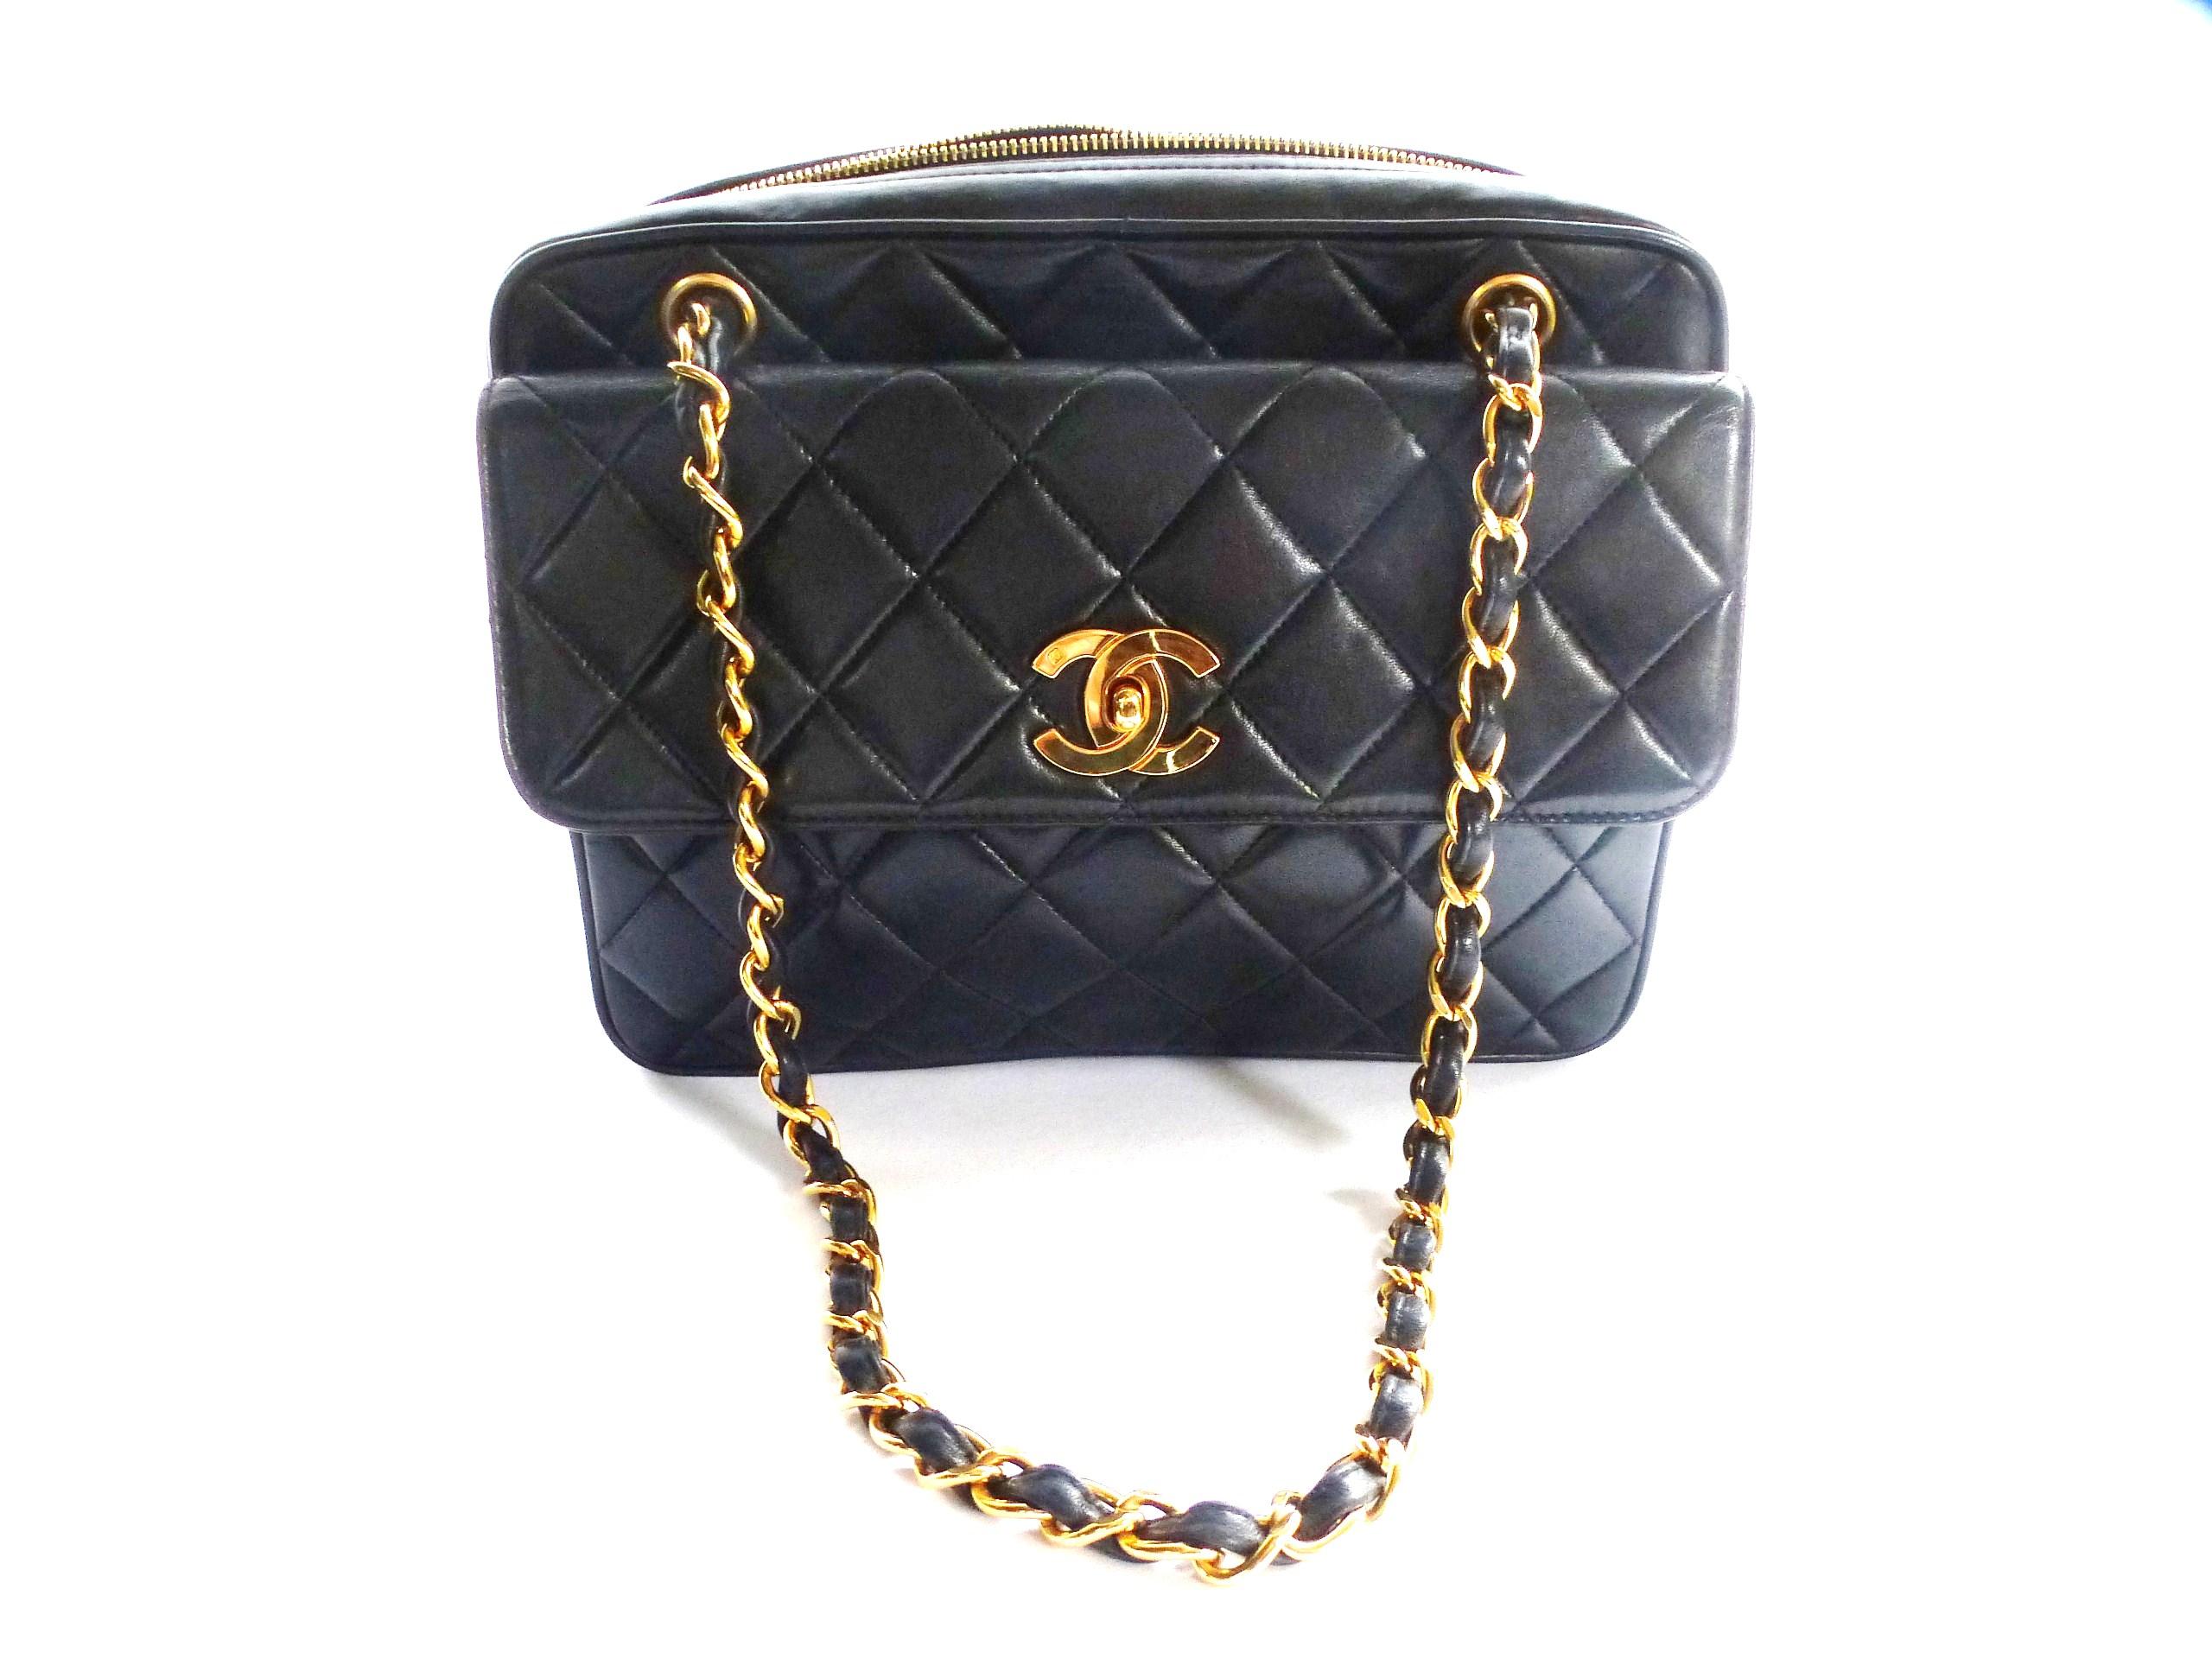 Vintage quilted shoulder bag with two handles. The pocket opening consists of a 25 cm long zip with a Chanel pendant. Inside one side pocket with zipper and one without. It is a very spacious bag with black leather inside feed. The front side of the